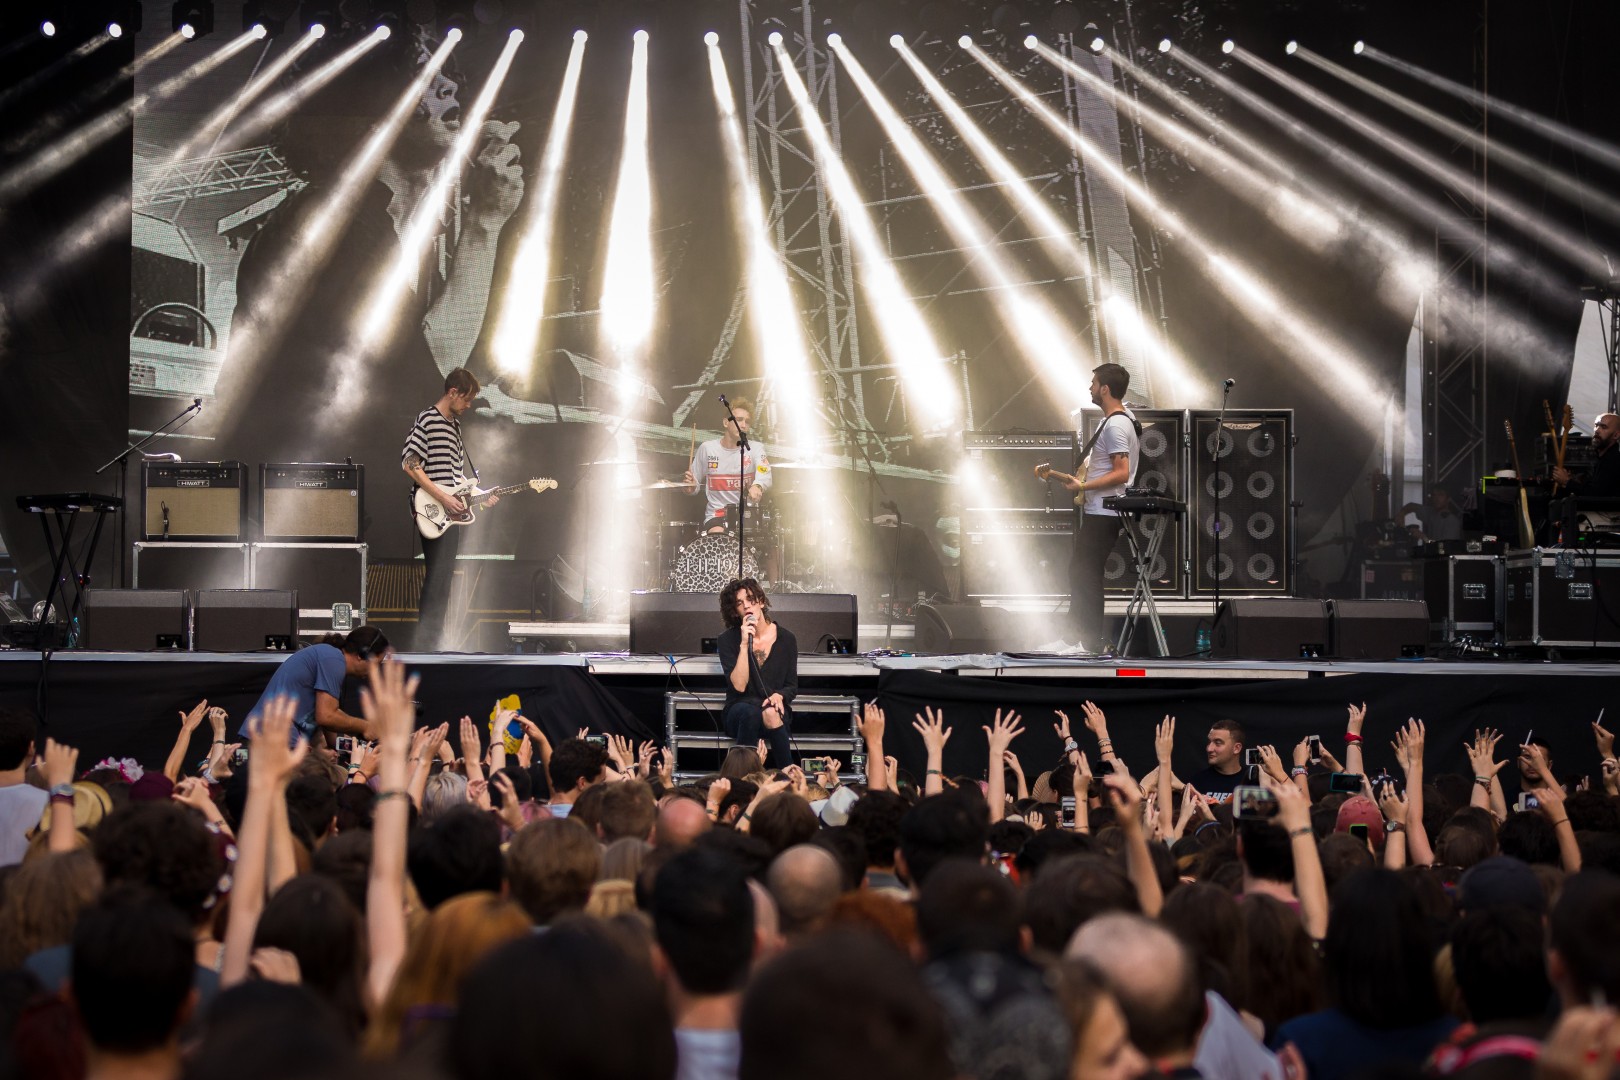 The 1975 at Domeniul Stirbey in Buftea on August 9, 2014 (1490c5a7c6)